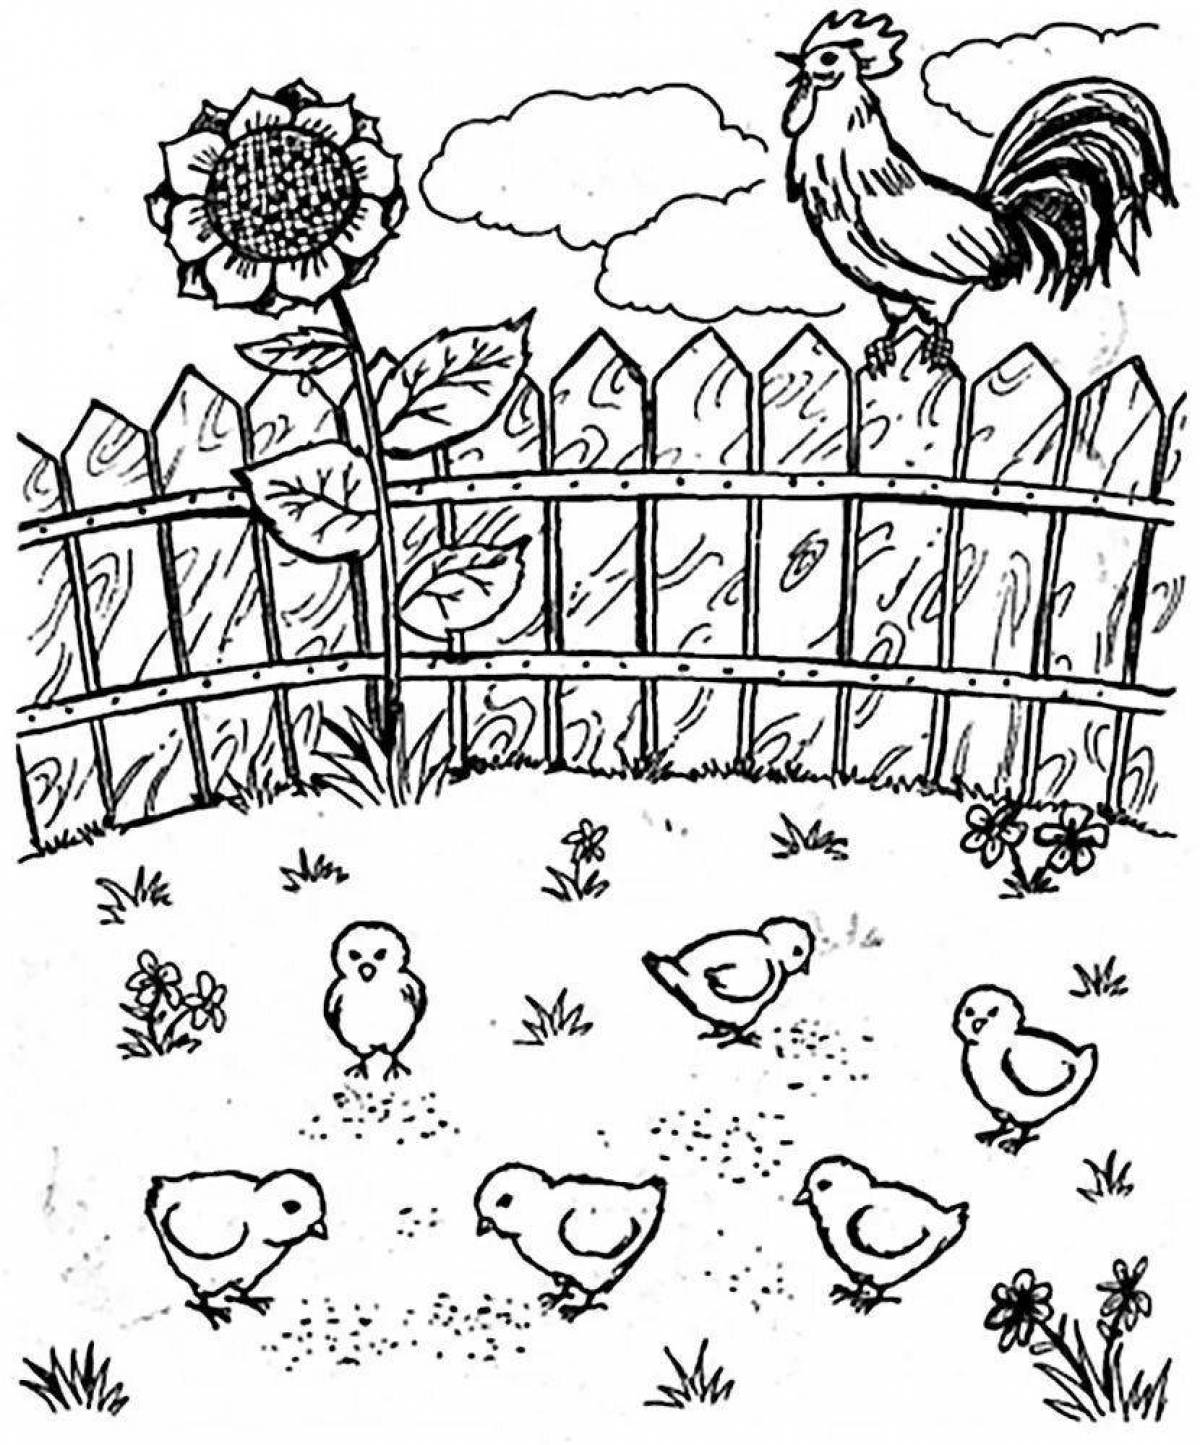 Charming one lot coloring book for kids